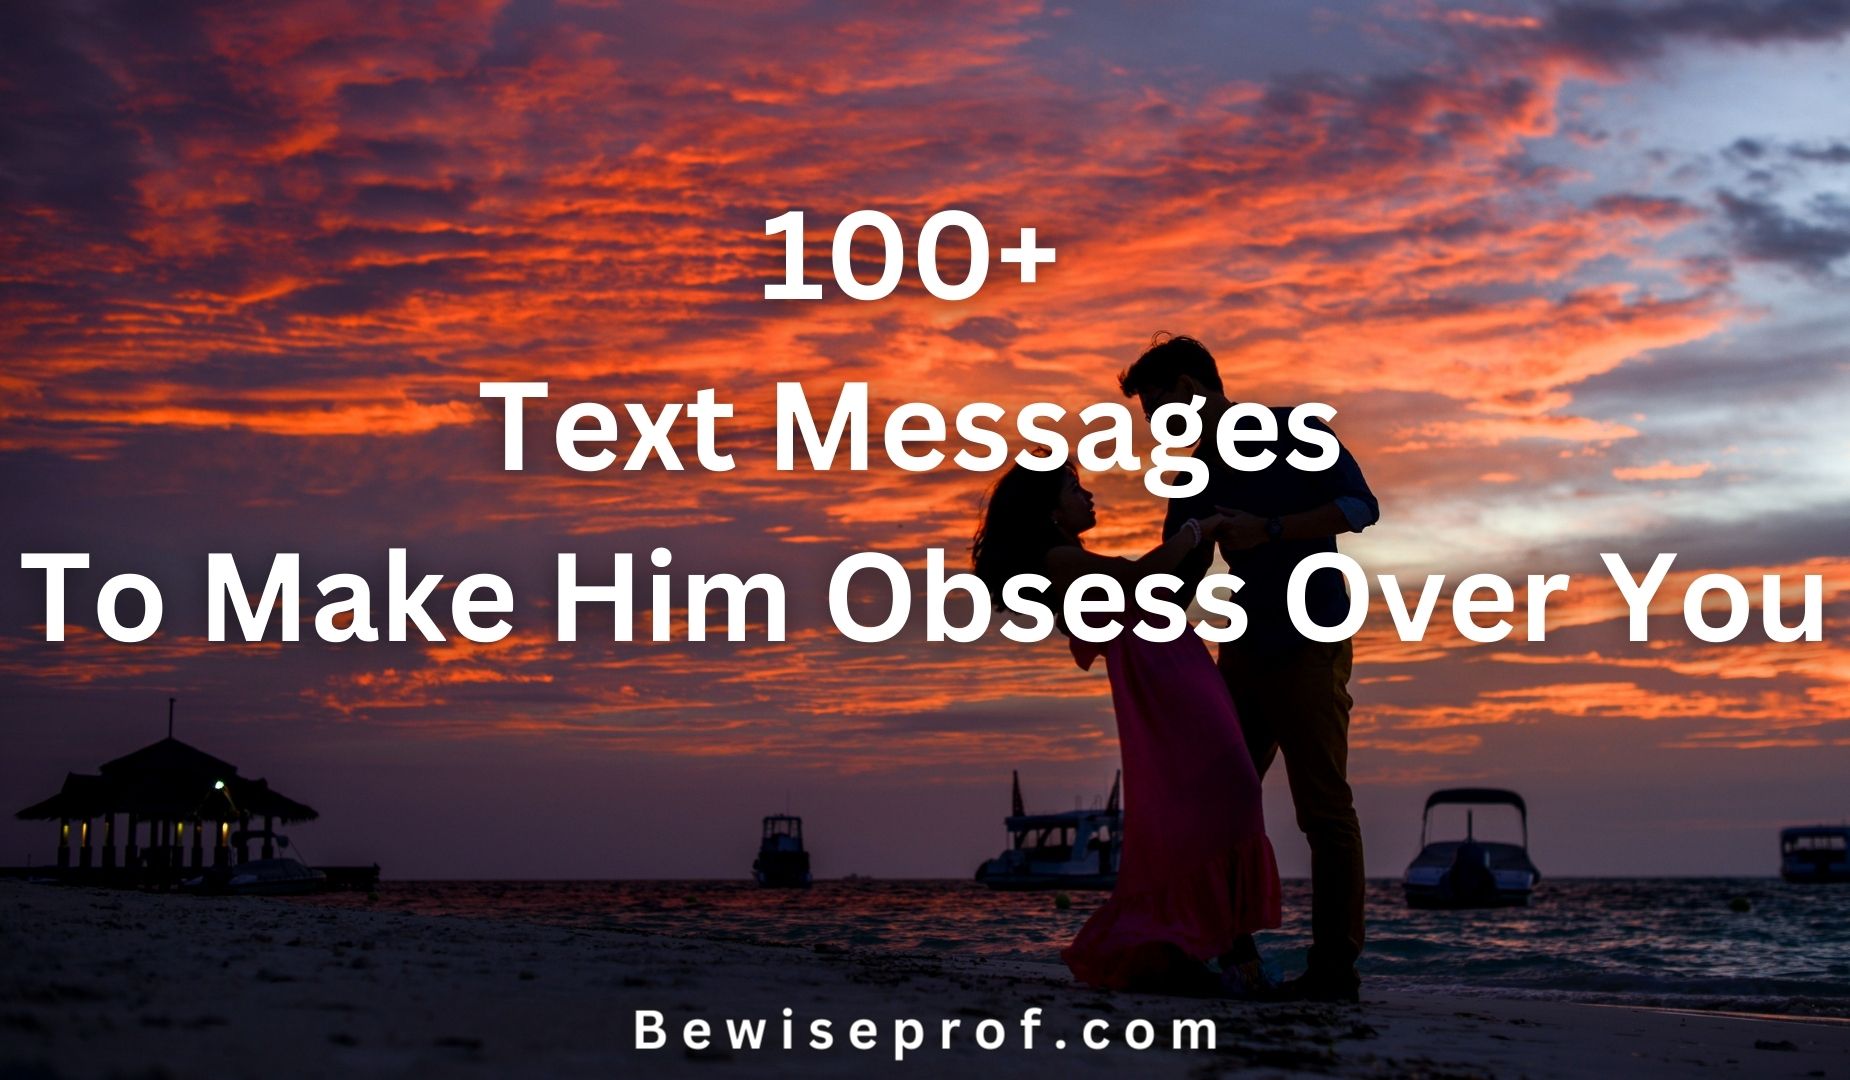 100+ Text Messages To Make Him Obsess Over You